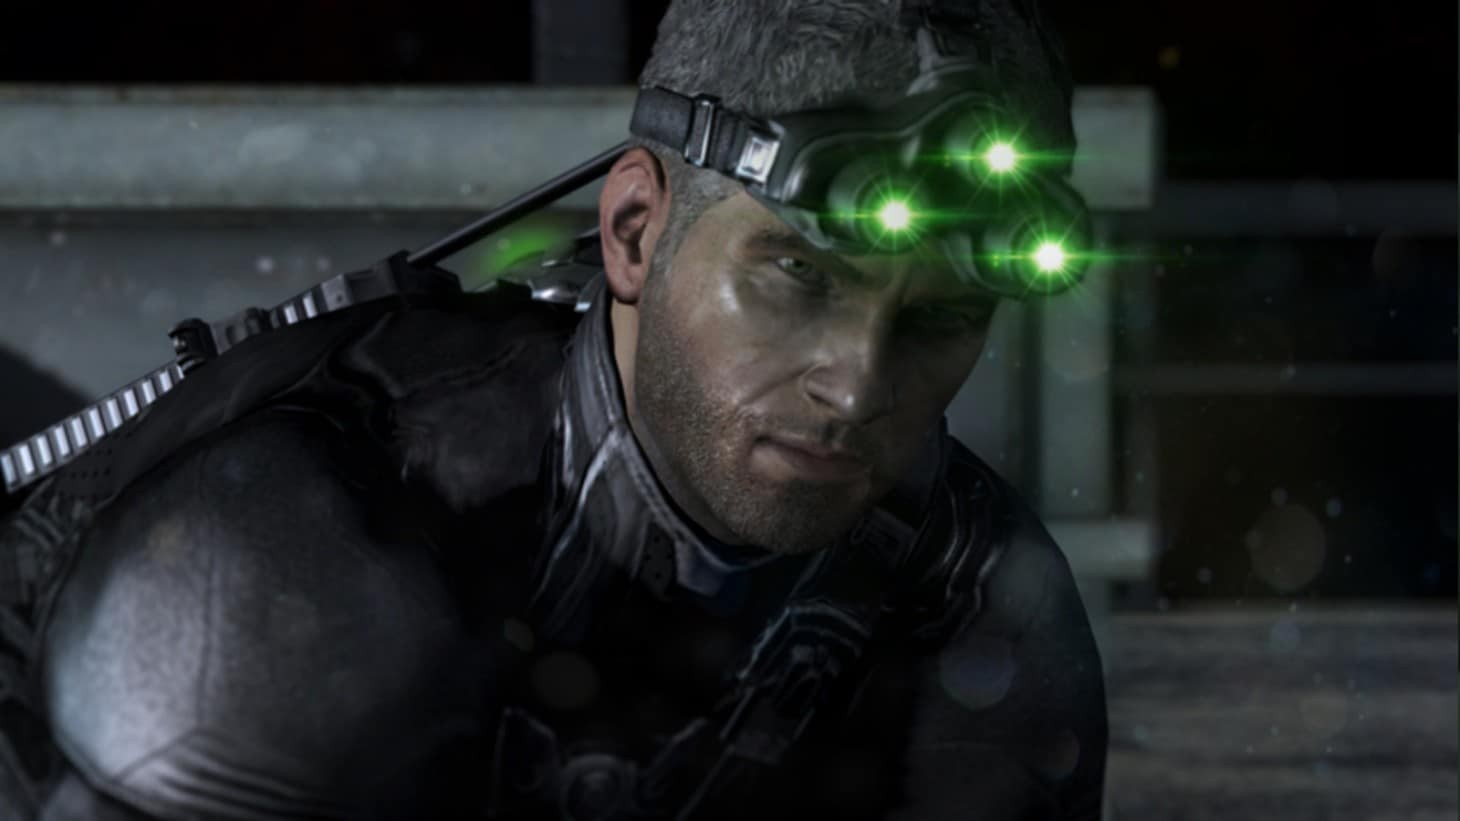 Splinter Cell Remake might be revealed soon